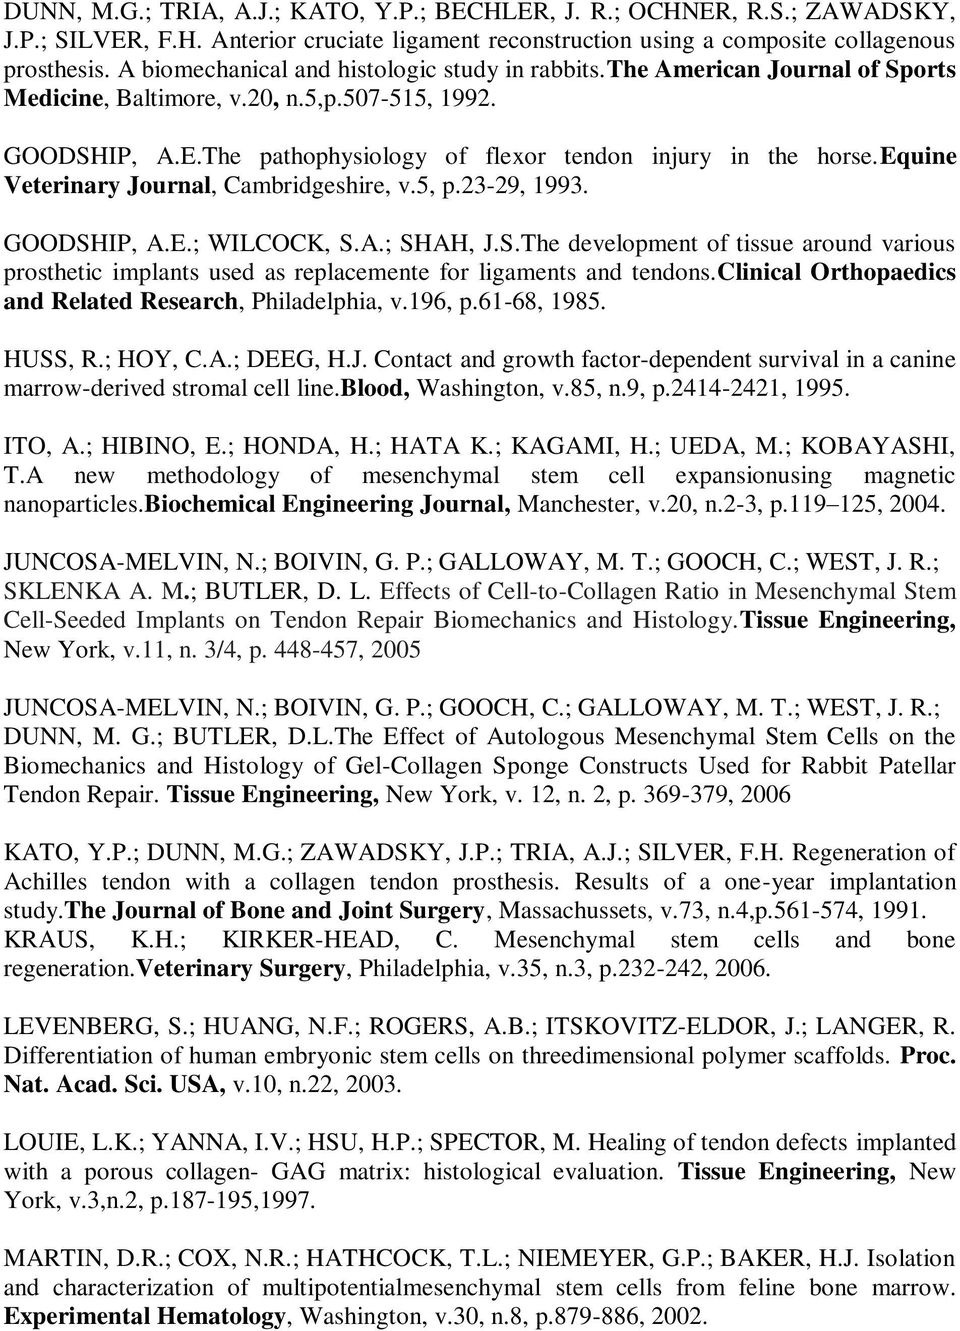 equine Veterinary Journal, Cambridgeshire, v.5, p.23-29, 1993. GOODSHIP, A.E.; WILCOCK, S.A.; SHAH, J.S.The development of tissue around various prosthetic implants used as replacemente for ligaments and tendons.